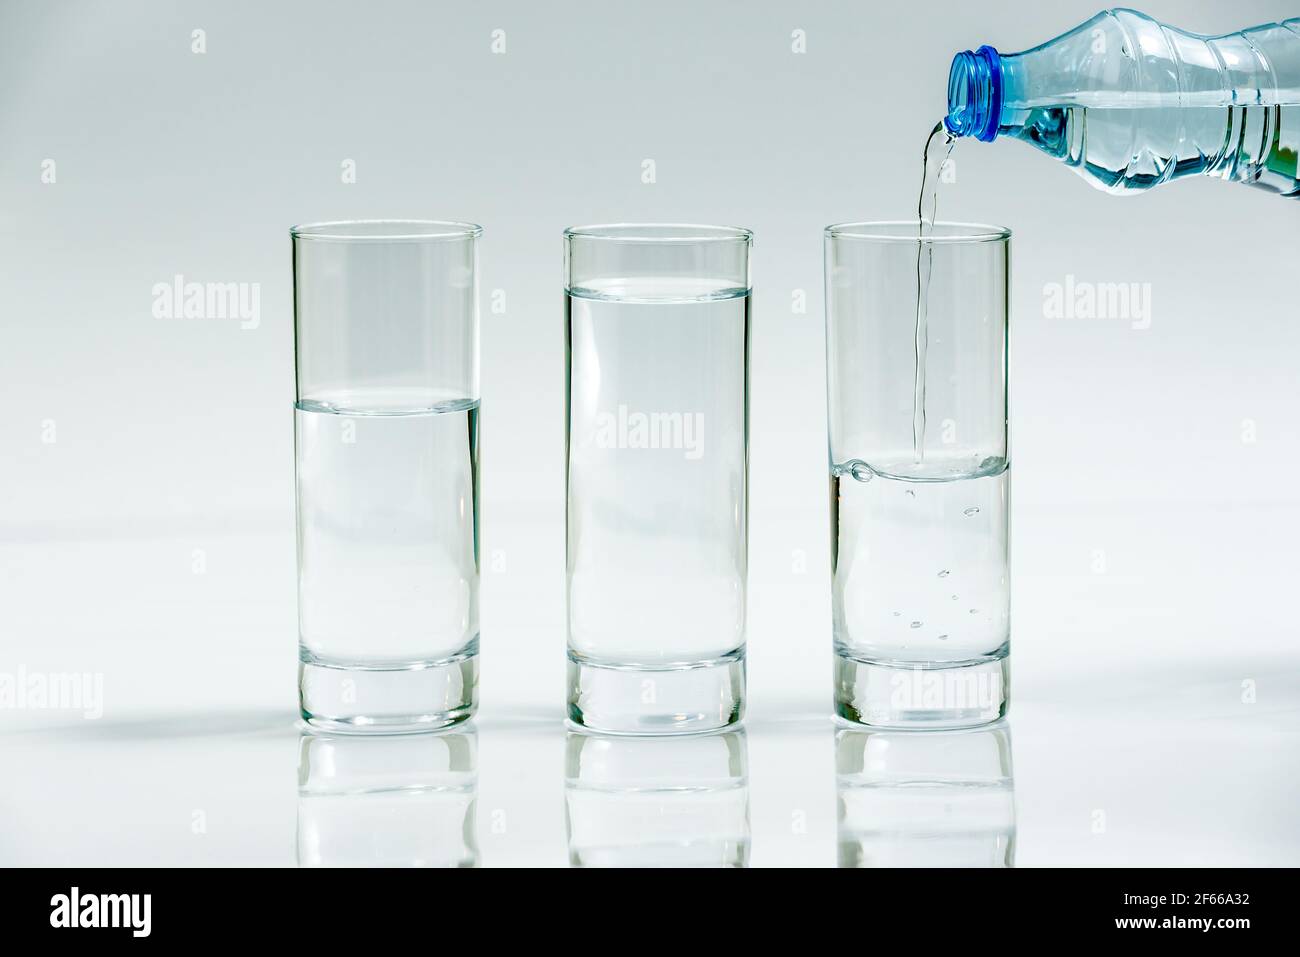 https://c8.alamy.com/comp/2F66A32/water-bottle-pour-water-water-into-three-glasses-different-level-on-white-background-three-glasses-of-water-2F66A32.jpg